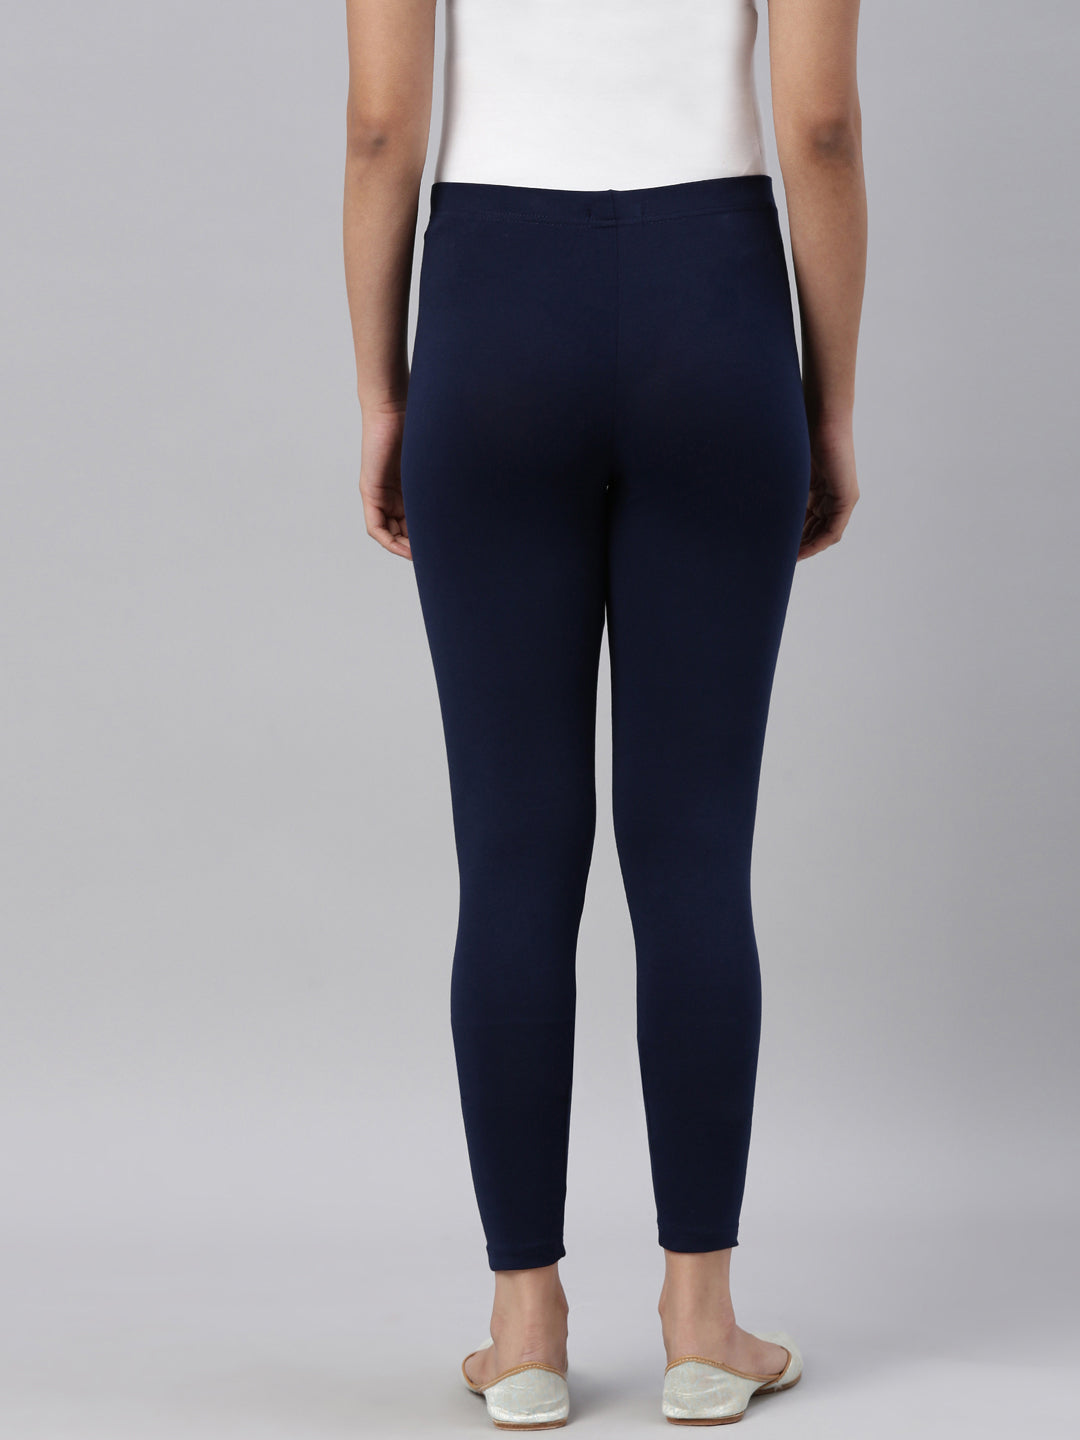 Prisma Ankle Cut Navy Blue - M, Navy Blue at Rs 190, Ankle Length Leggings